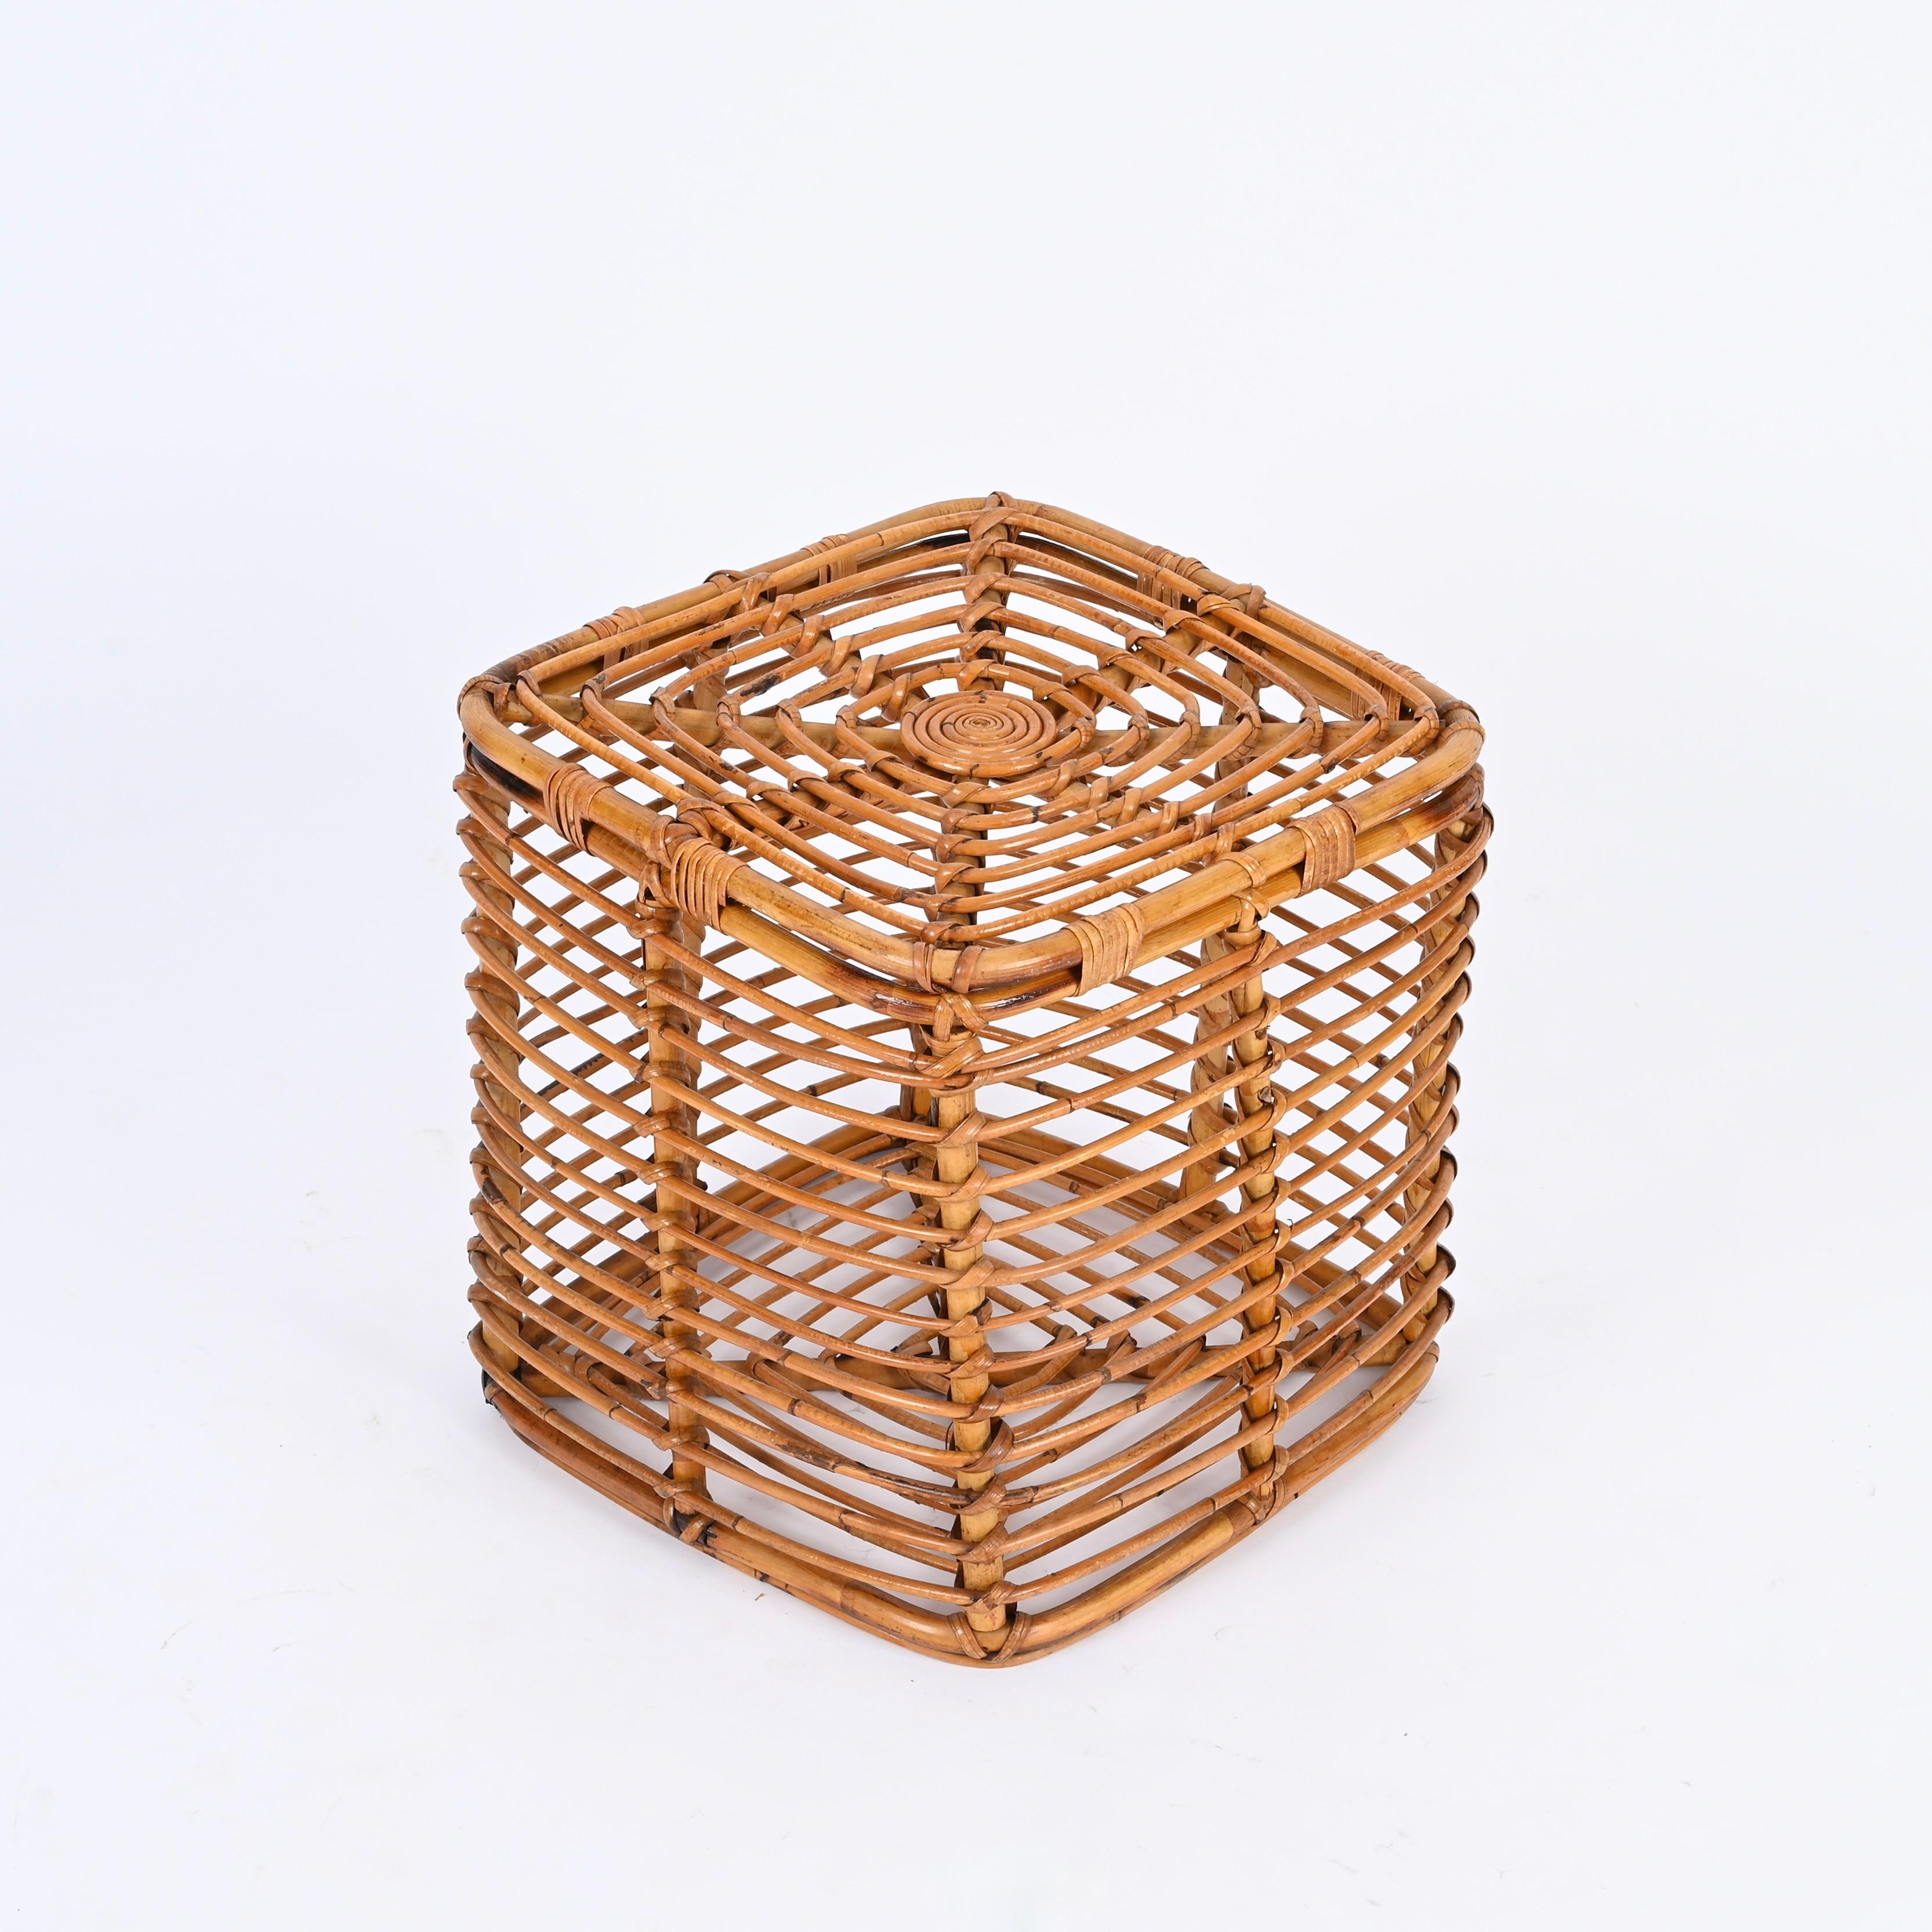 Bamboo Midcentury Tito Agnoli Rattan and Wicker Square Pouf Stool, Italy, 1970s For Sale